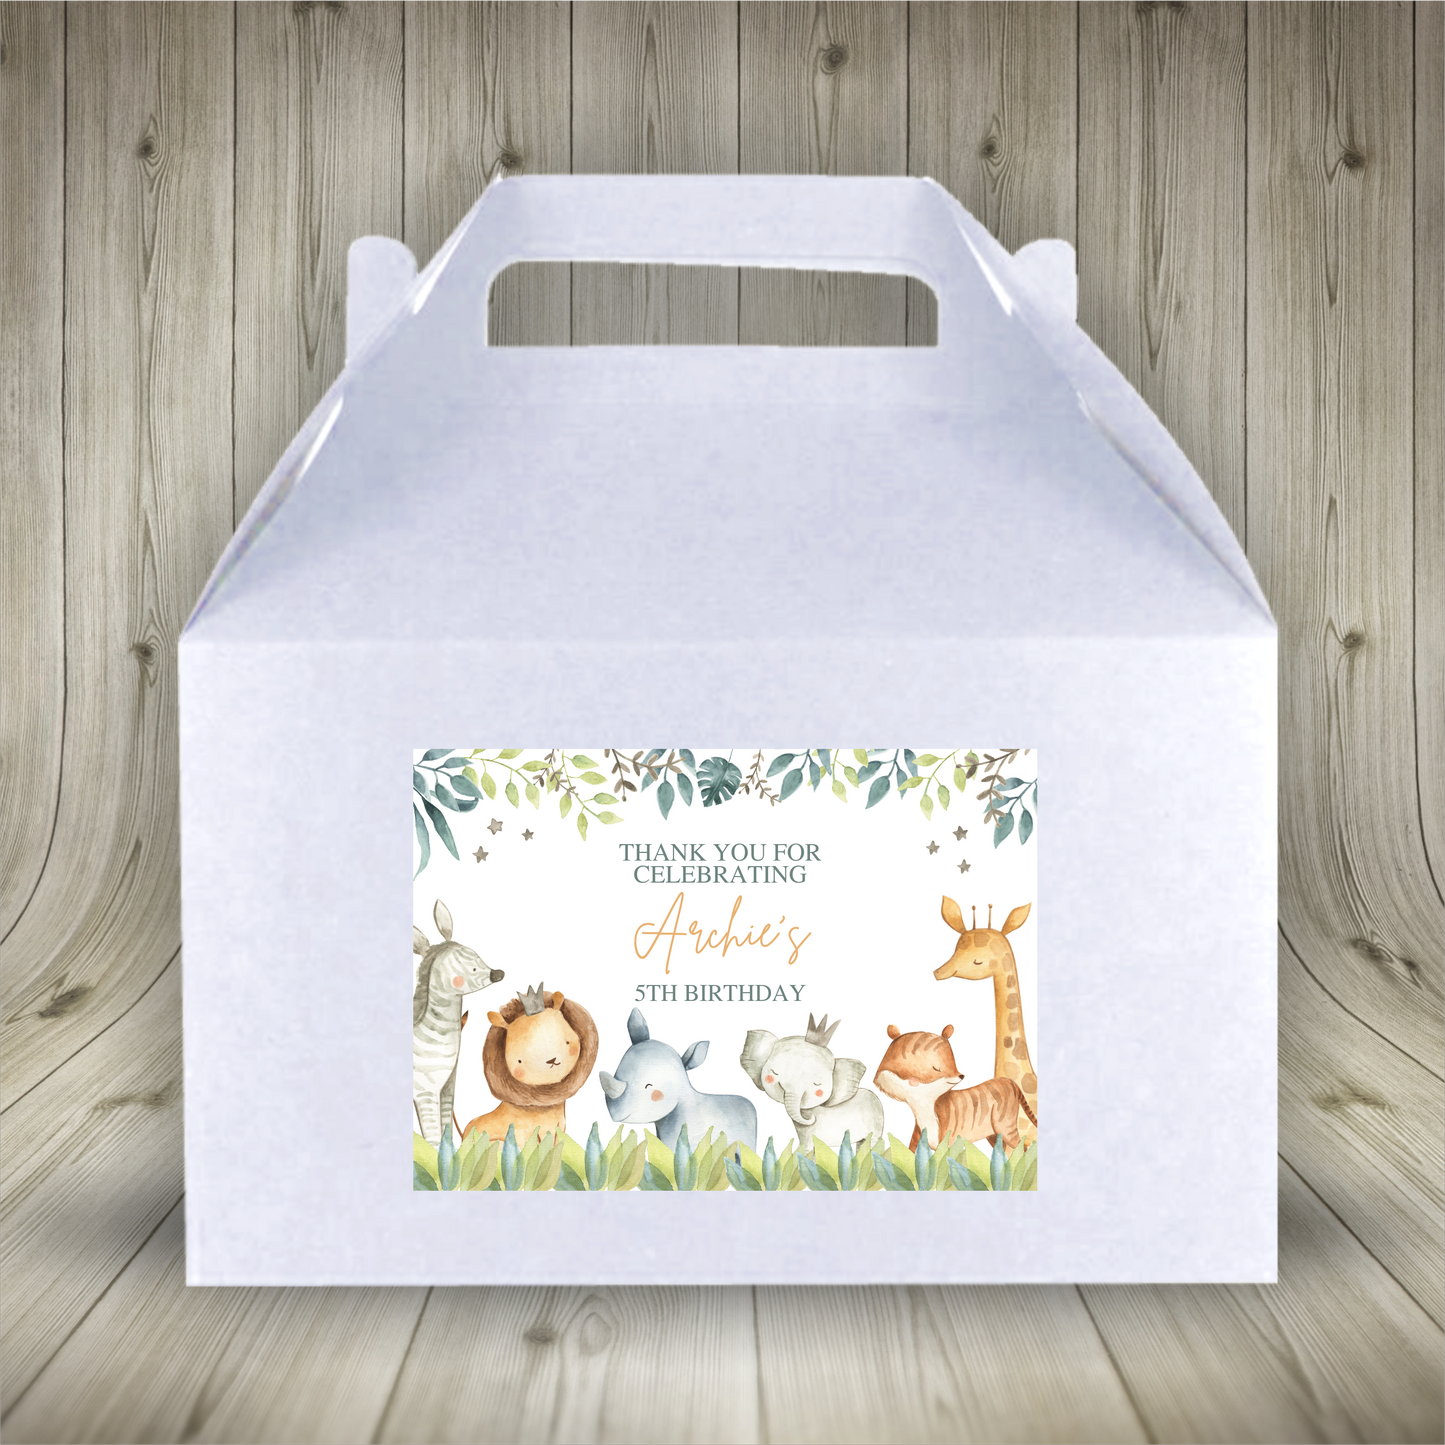 Party Boxes | Safari Animal Party Boxes | Safari Animal Party | Party Boxes | Safari Animal Party Decor | Party Bags